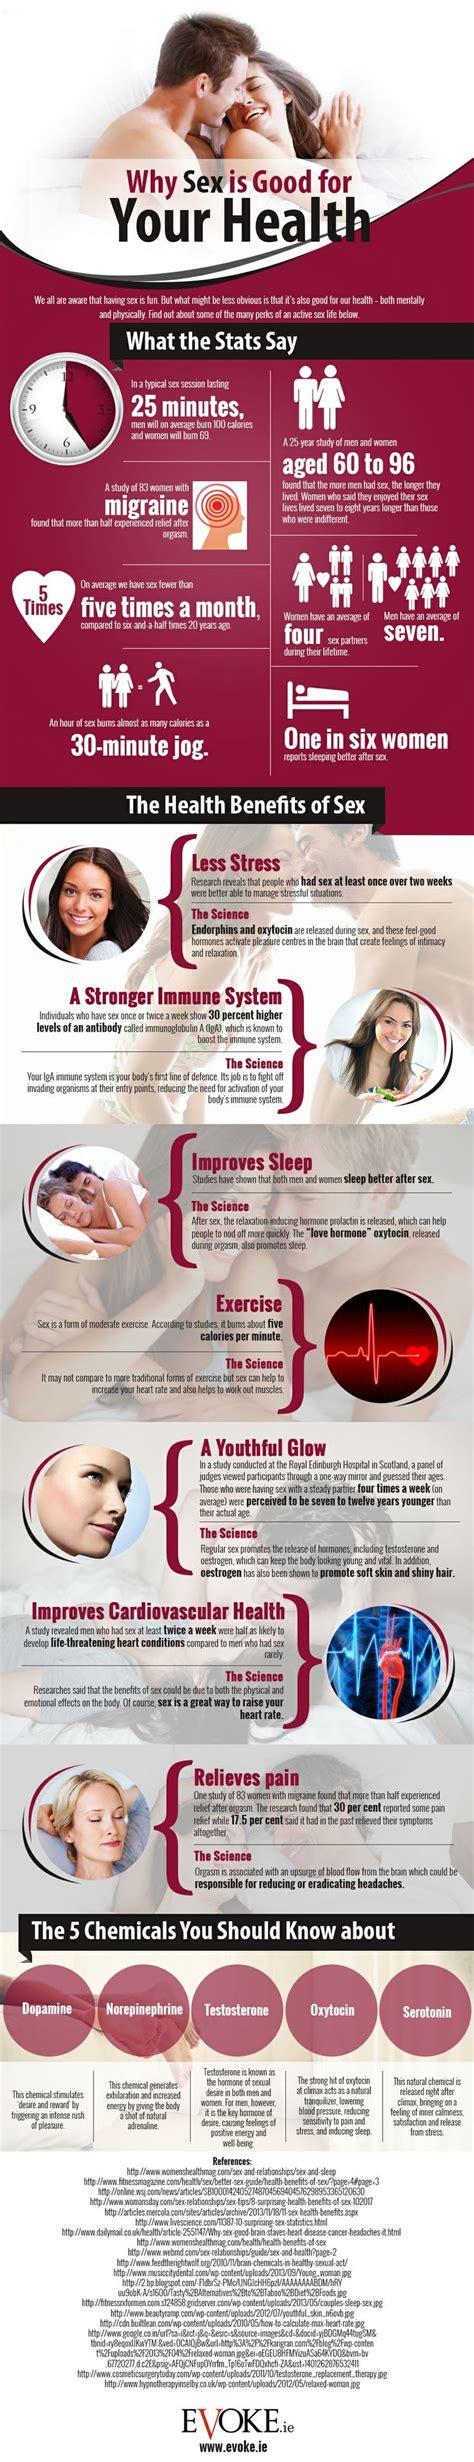 7 health benefits of sex infographic naturalon natural health news and discoveries